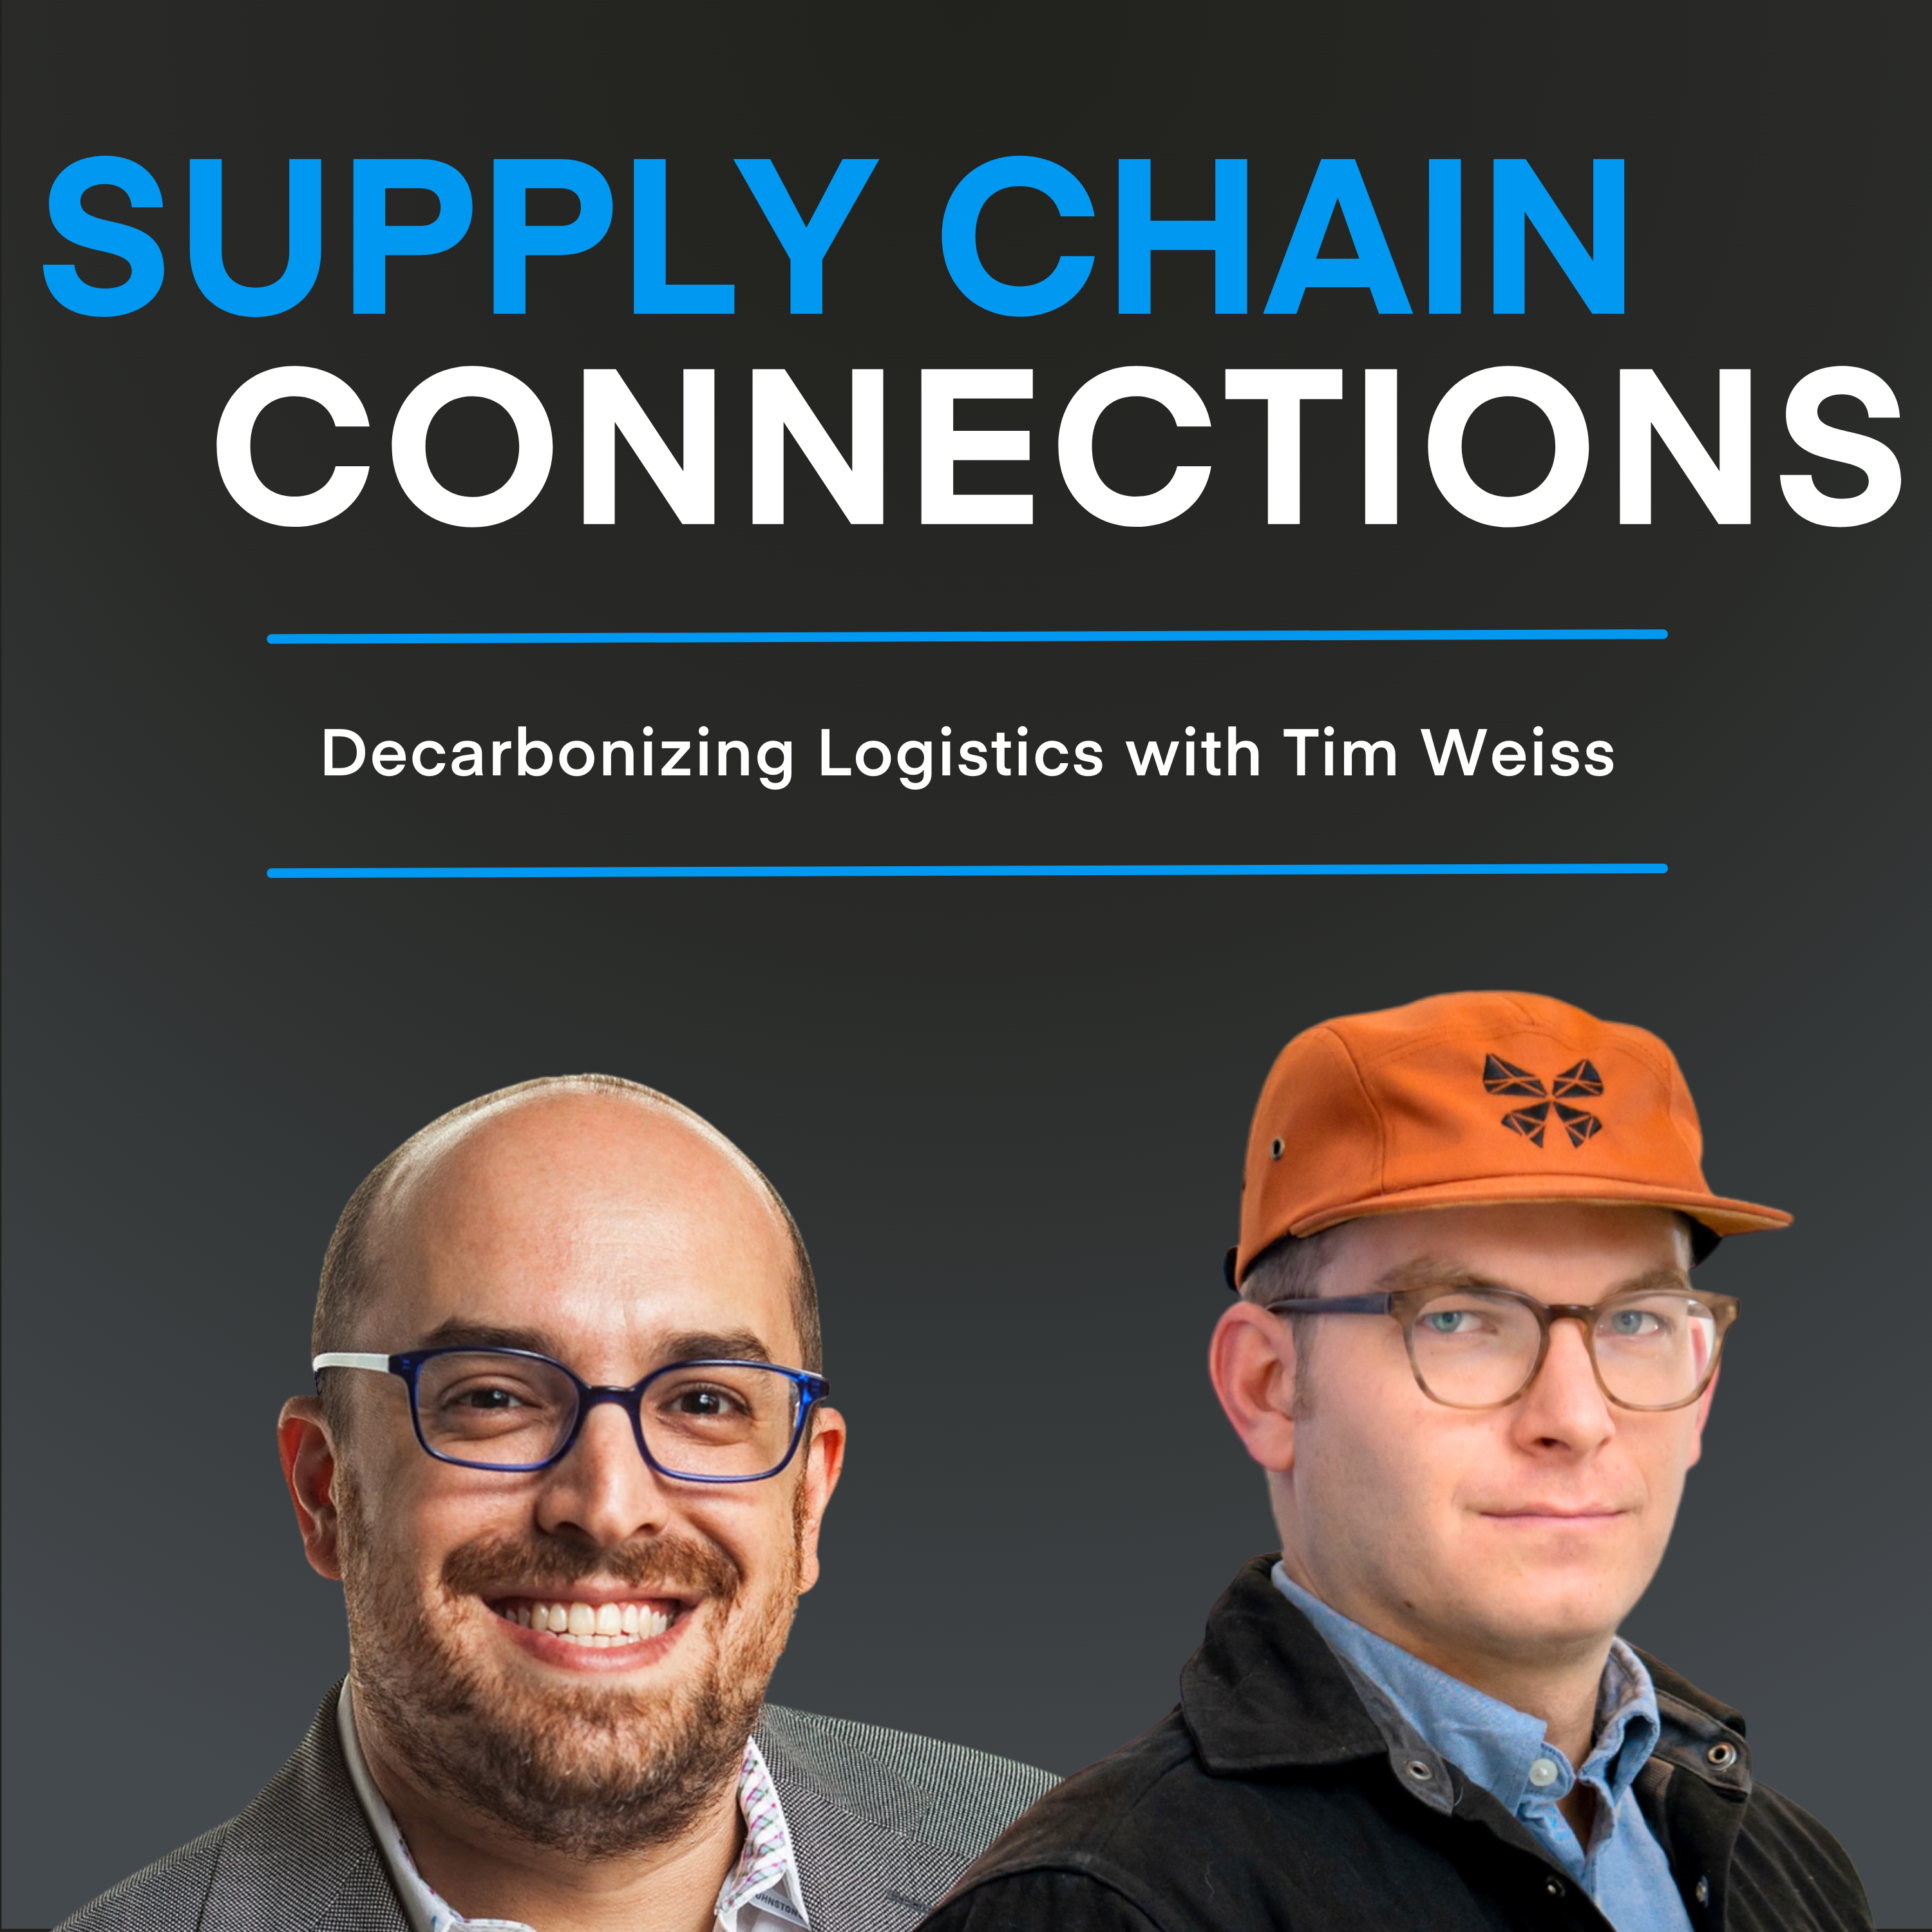 Decarbonizing logistics with Tim Weiss, Optera